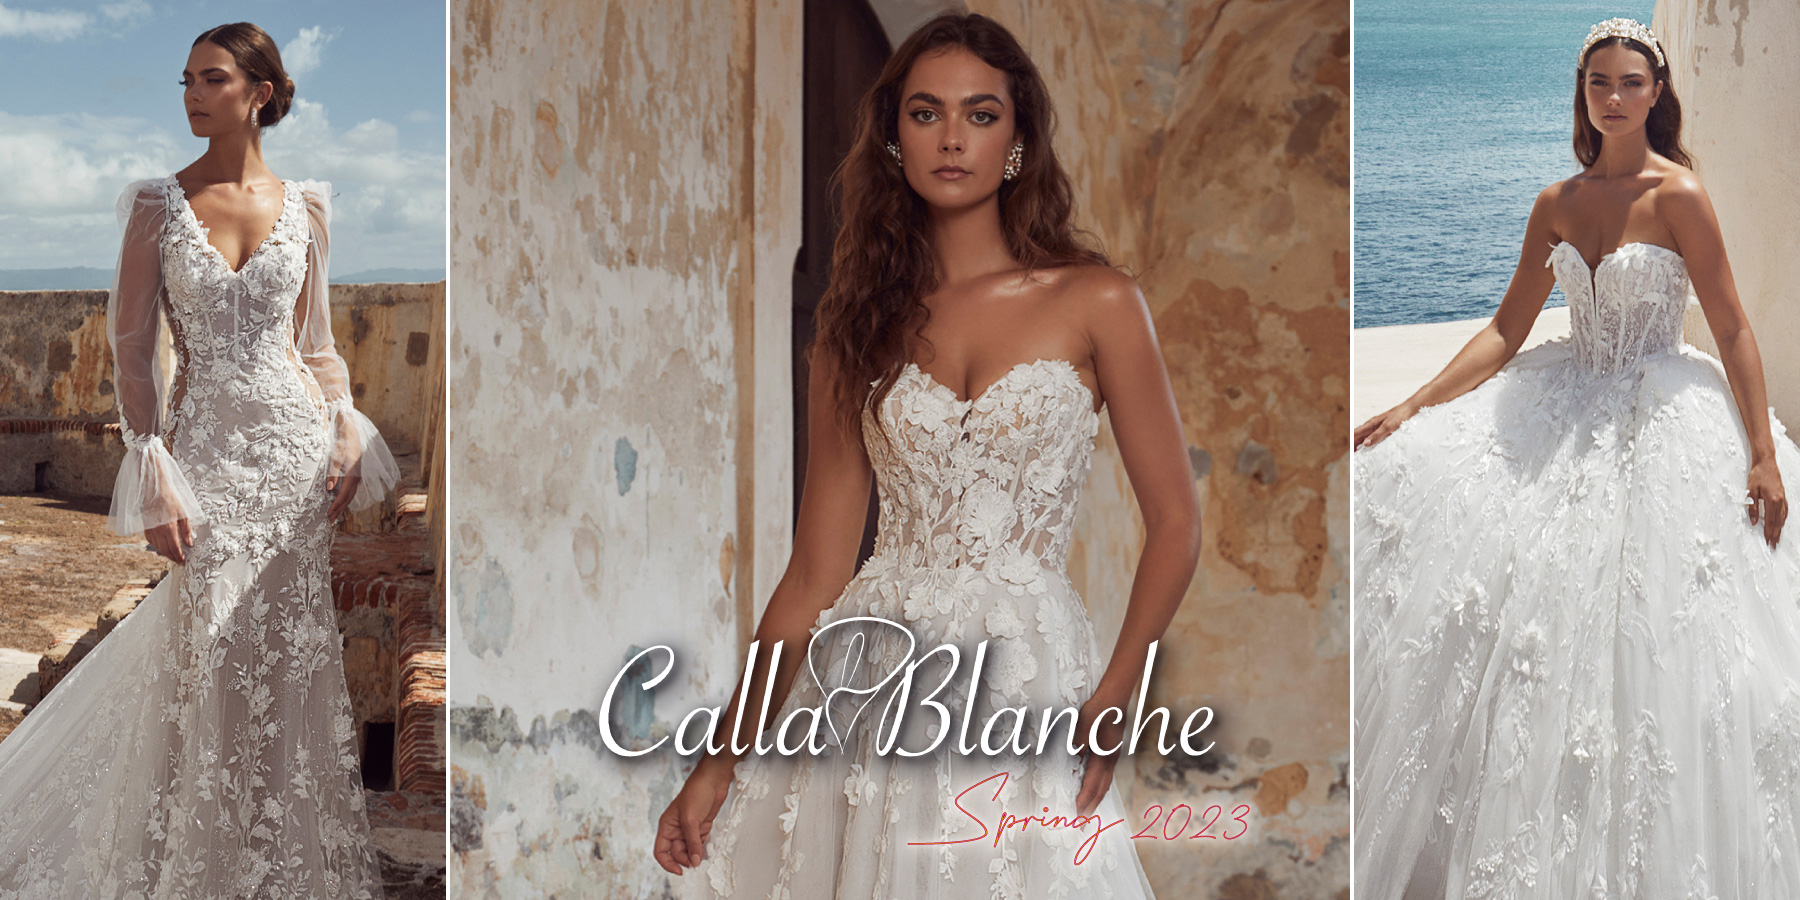 Calla Blanche Wedding Dresses in the United States | The Dressfinder